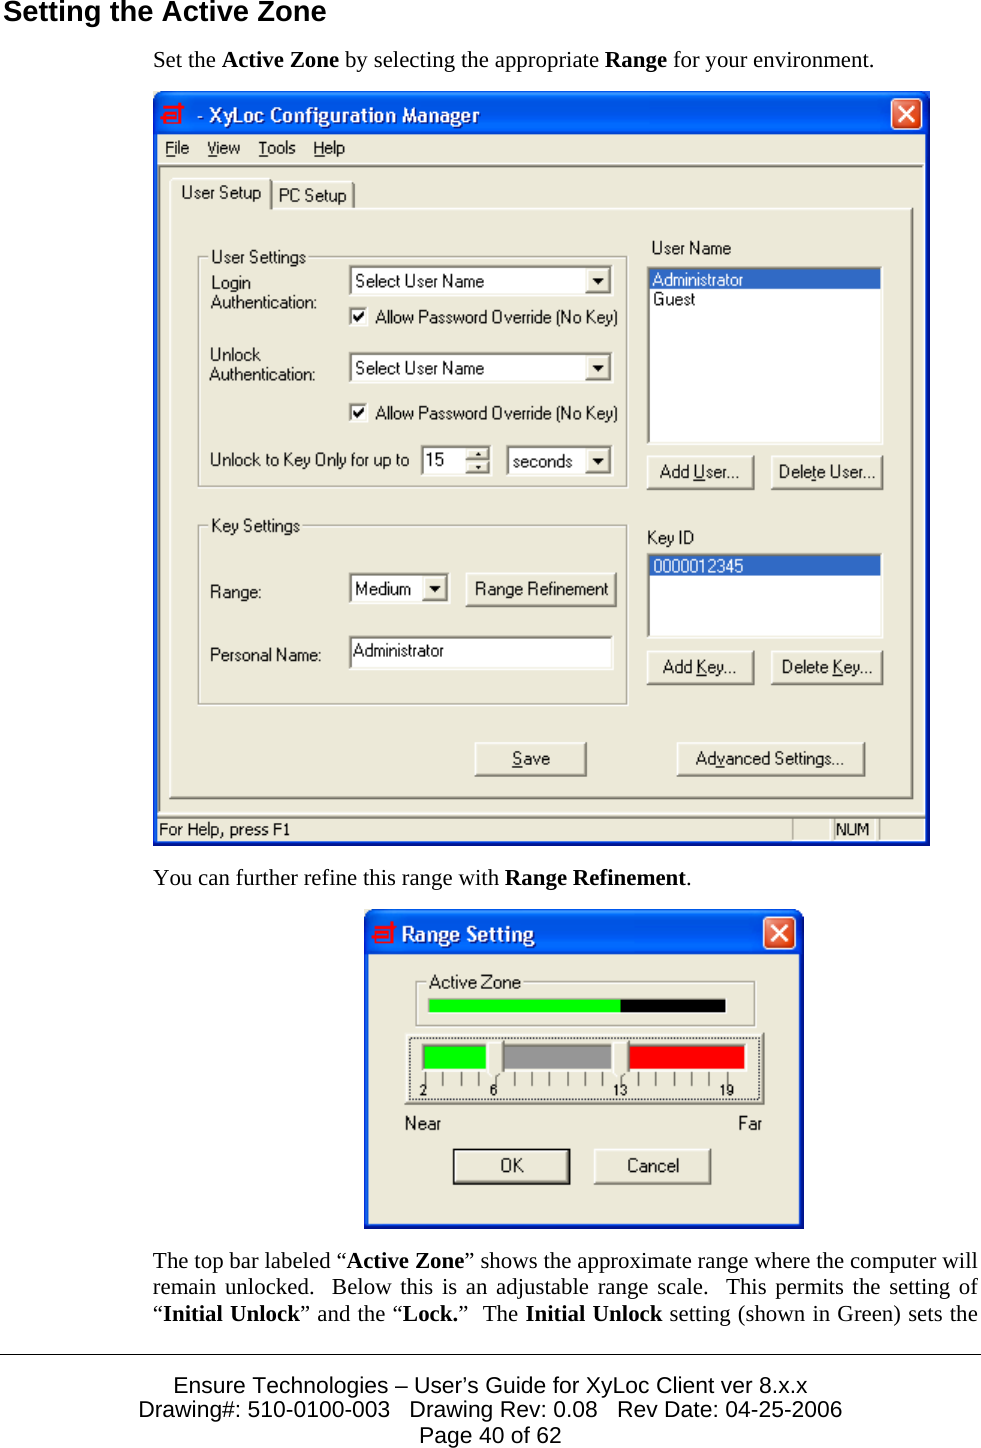  Ensure Technologies – User’s Guide for XyLoc Client ver 8.x.x Drawing#: 510-0100-003   Drawing Rev: 0.08   Rev Date: 04-25-2006 Page 40 of 62 Setting the Active Zone Set the Active Zone by selecting the appropriate Range for your environment.    You can further refine this range with Range Refinement.  The top bar labeled “Active Zone” shows the approximate range where the computer will remain unlocked.  Below this is an adjustable range scale.  This permits the setting of “Initial Unlock” and the “Lock.”  The Initial Unlock setting (shown in Green) sets the 